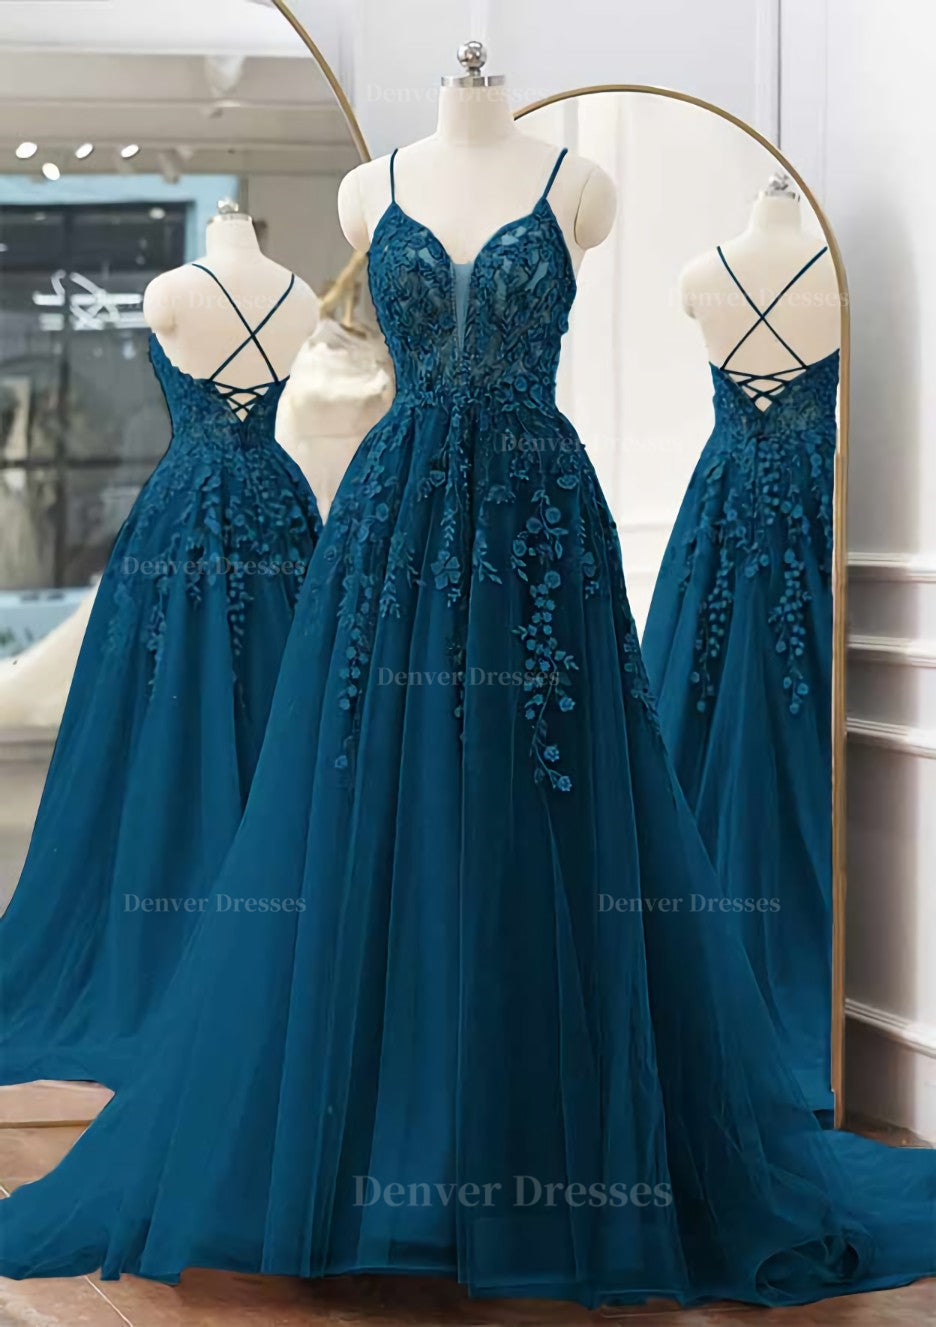 Party Dress Large Size, A-line V Neck Spaghetti Straps Sweep Train Tulle Prom Dress With Appliqued Beading